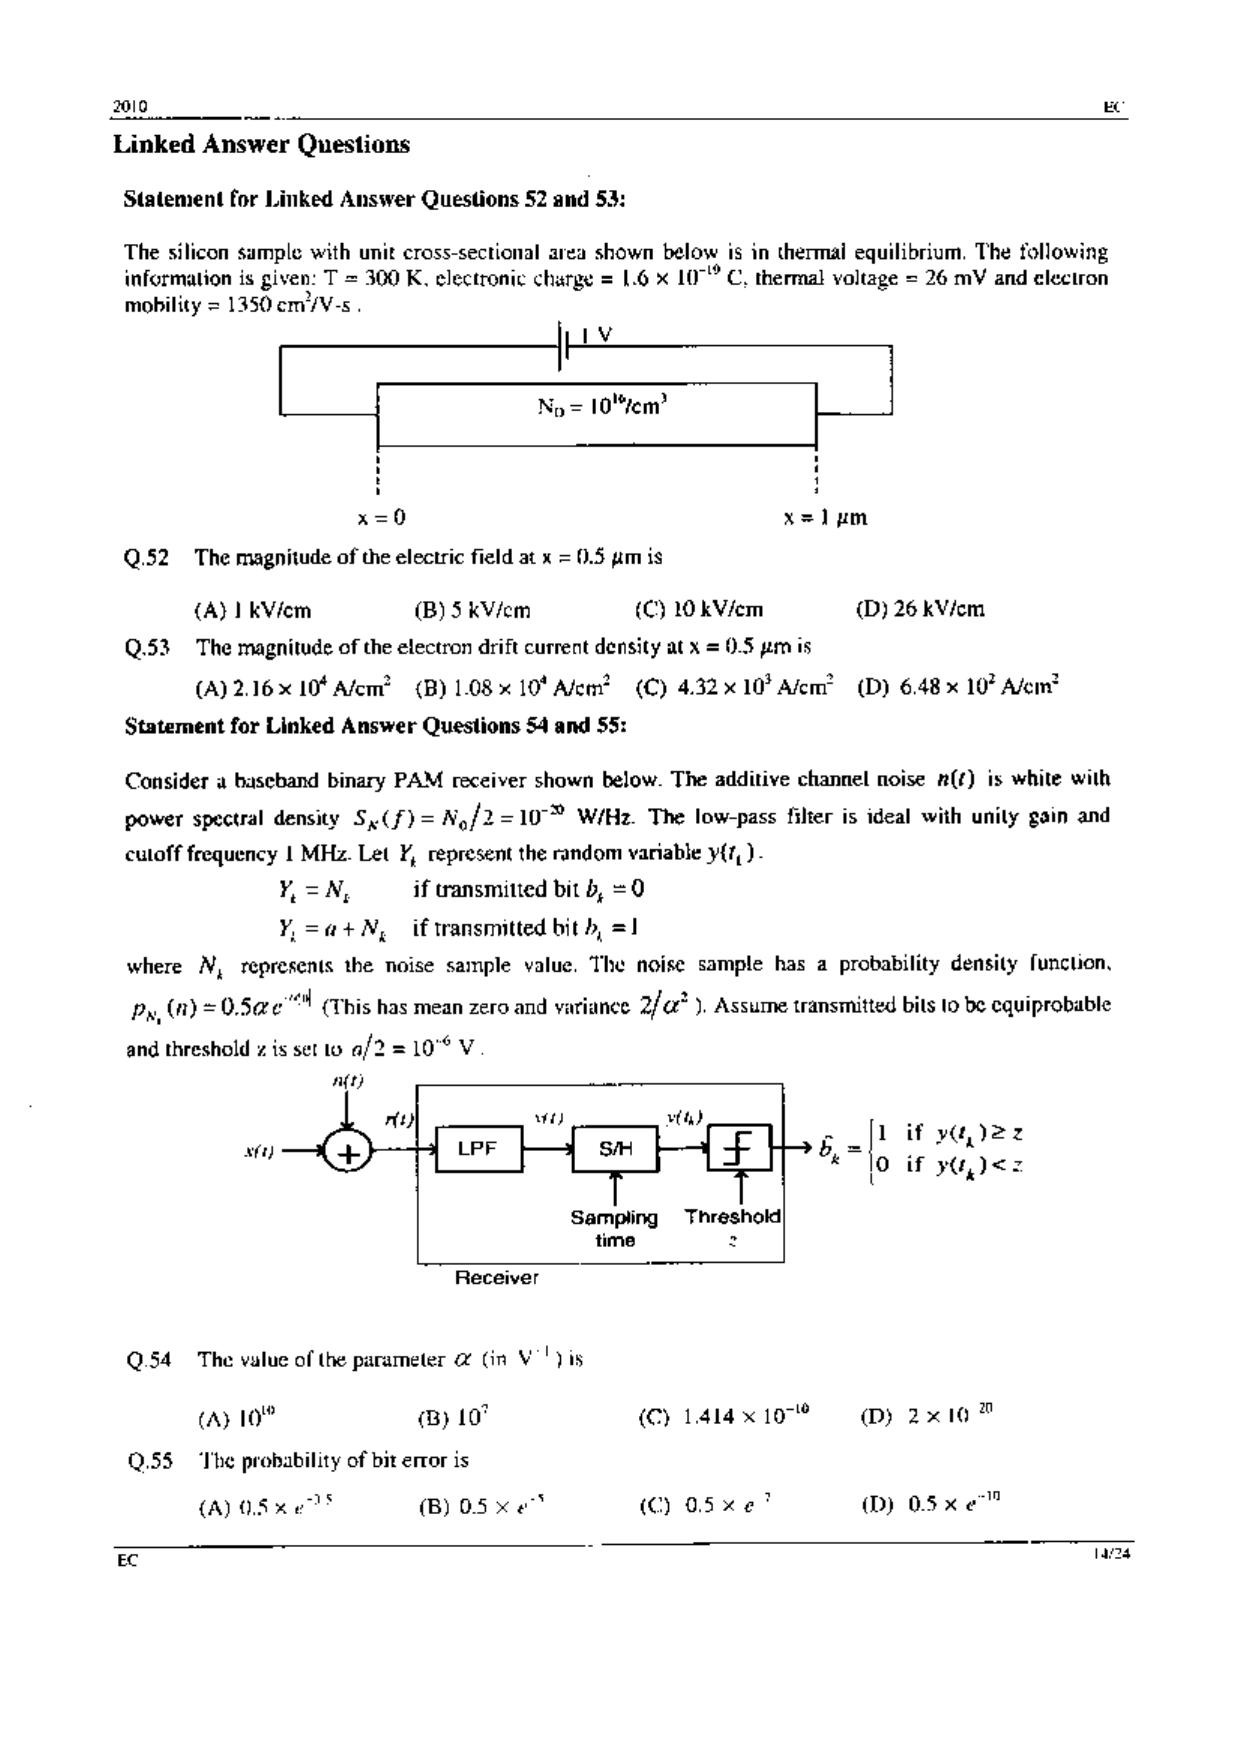 GATE 2010 Electronics and Communication Engineering (EC) Question Paper with Answer Key - Page 14